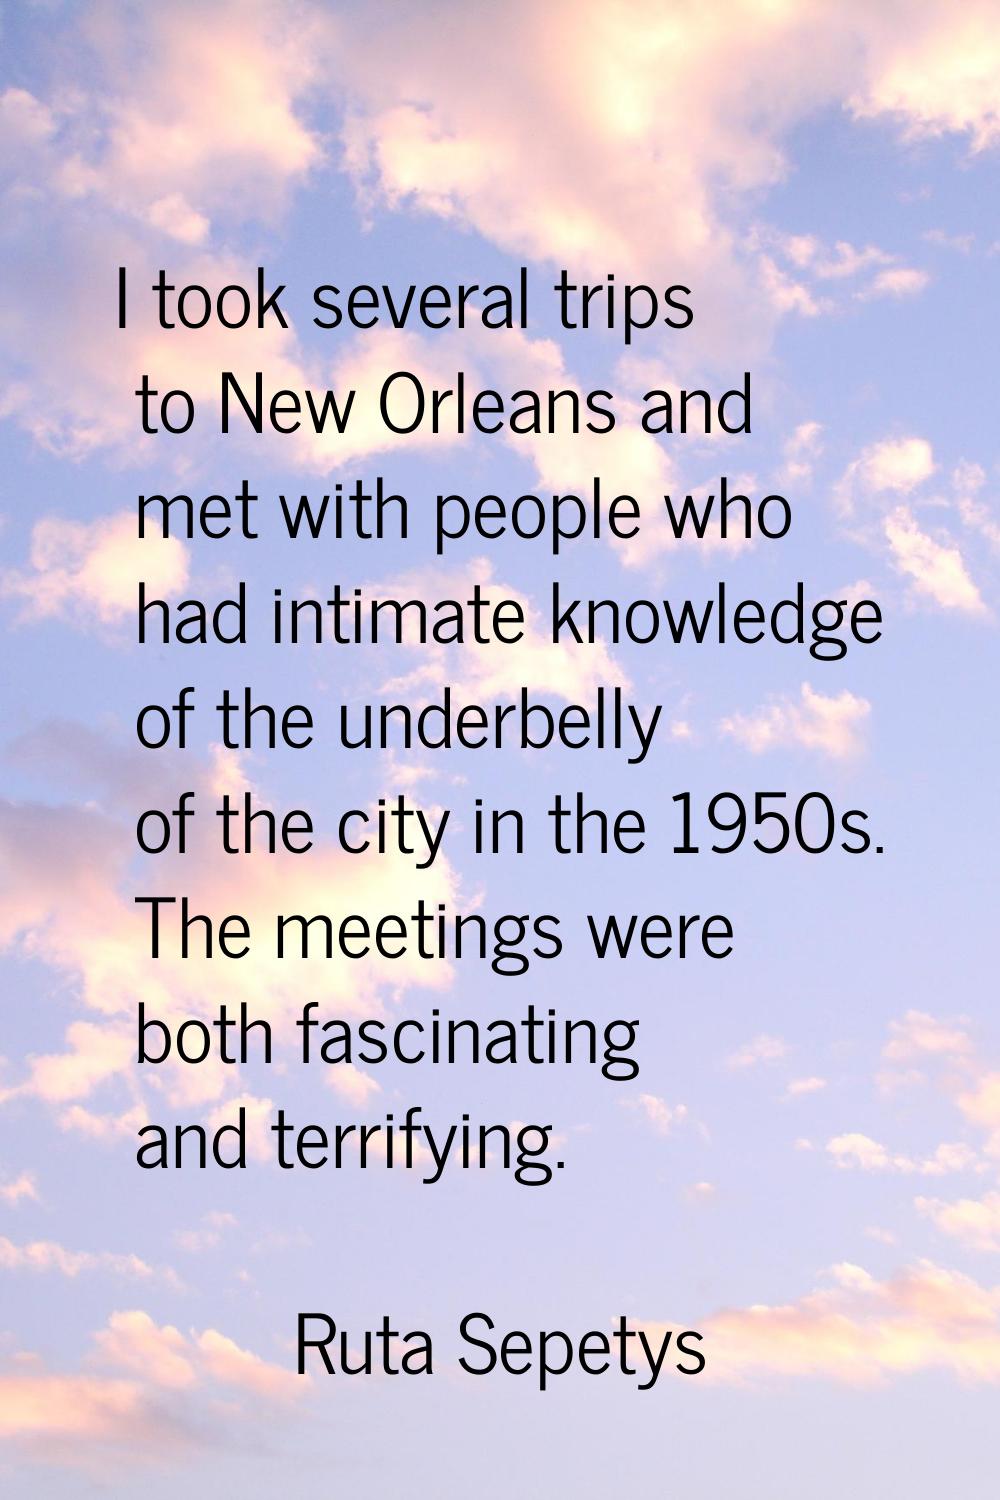 I took several trips to New Orleans and met with people who had intimate knowledge of the underbell